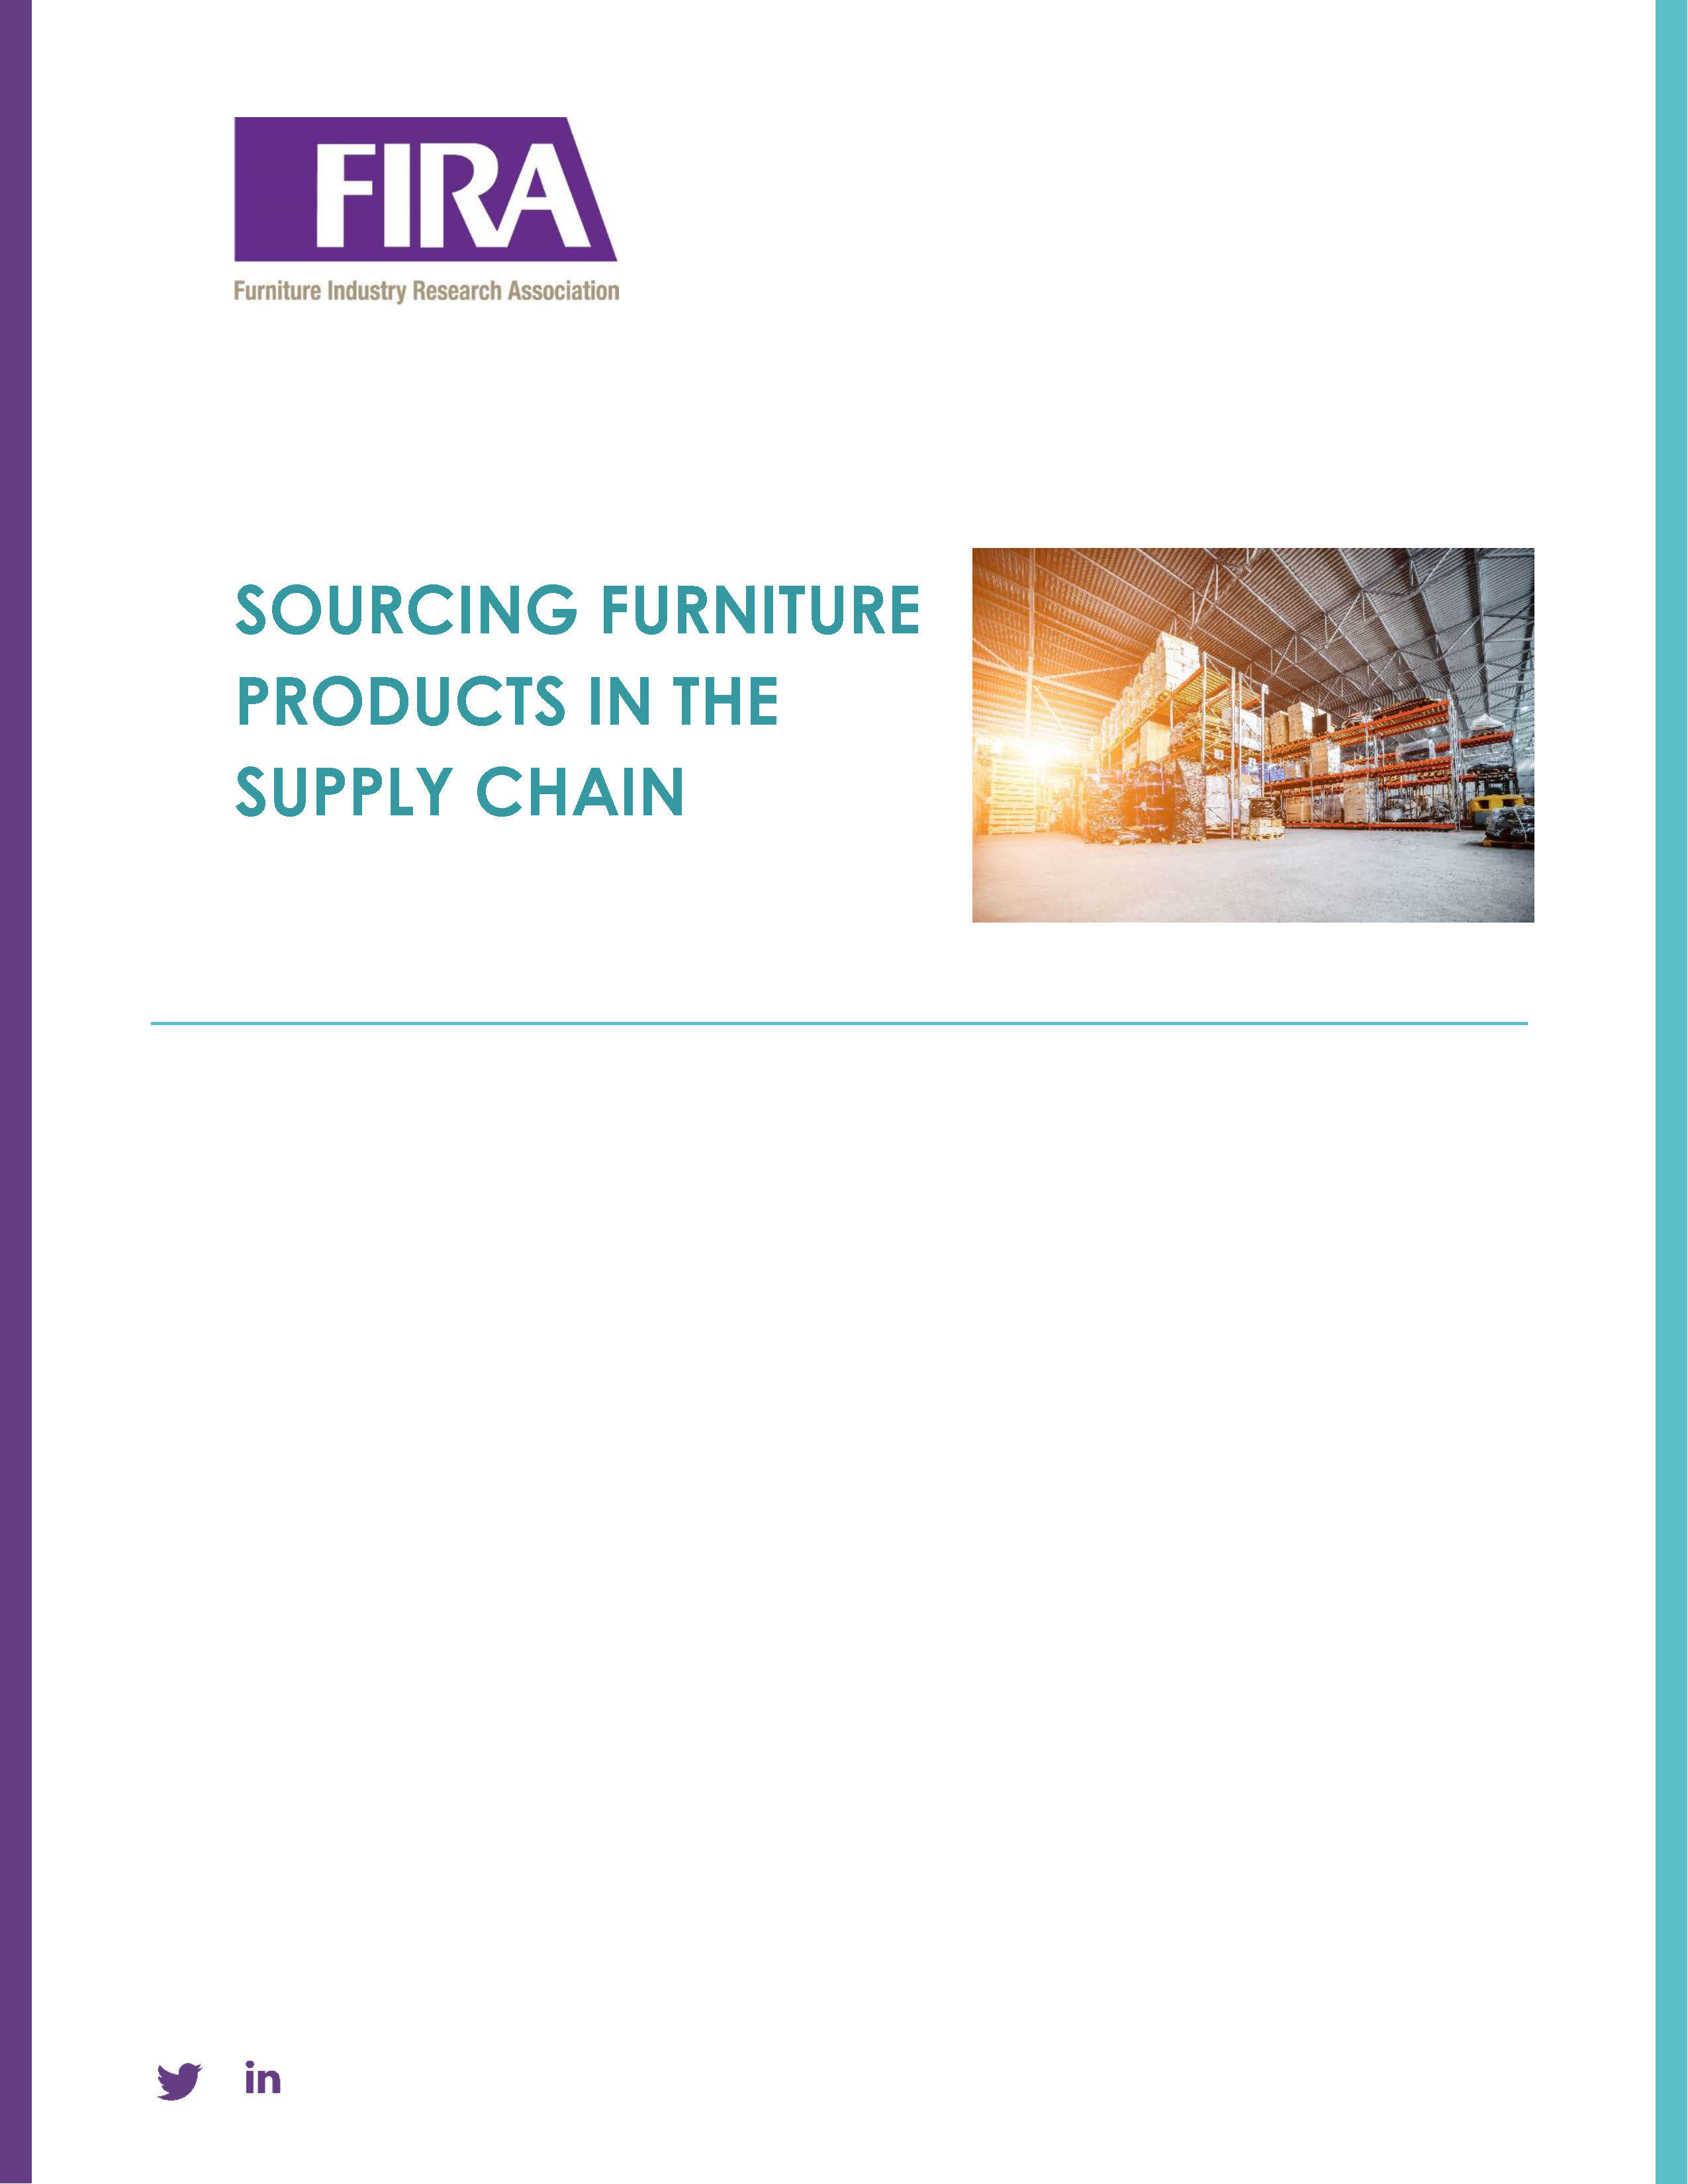 Sourcing Furniture Products in the Supply Chain